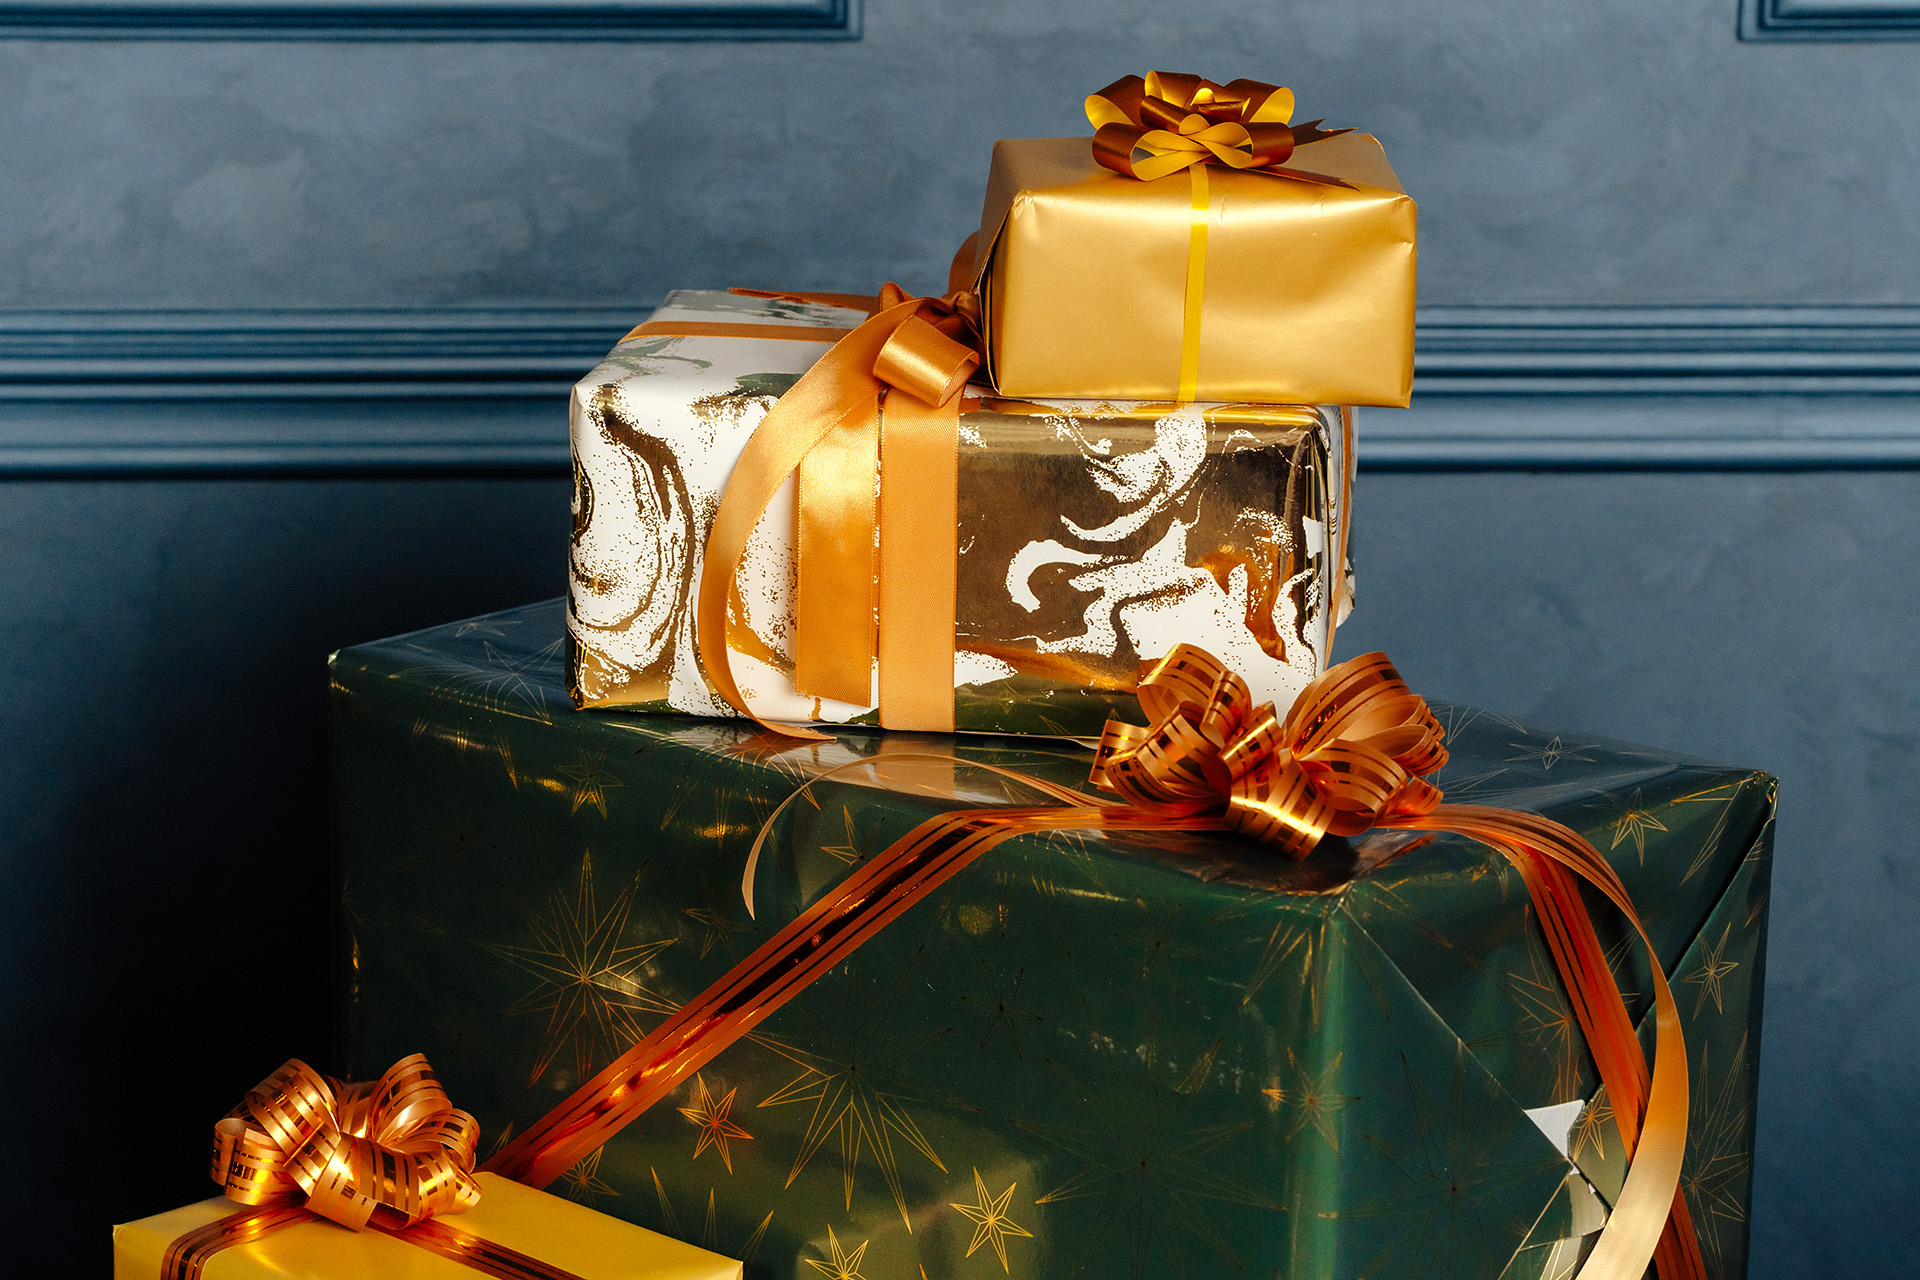 'Tis the Season to Be Giving: A Healthy Holiday Gift Guide